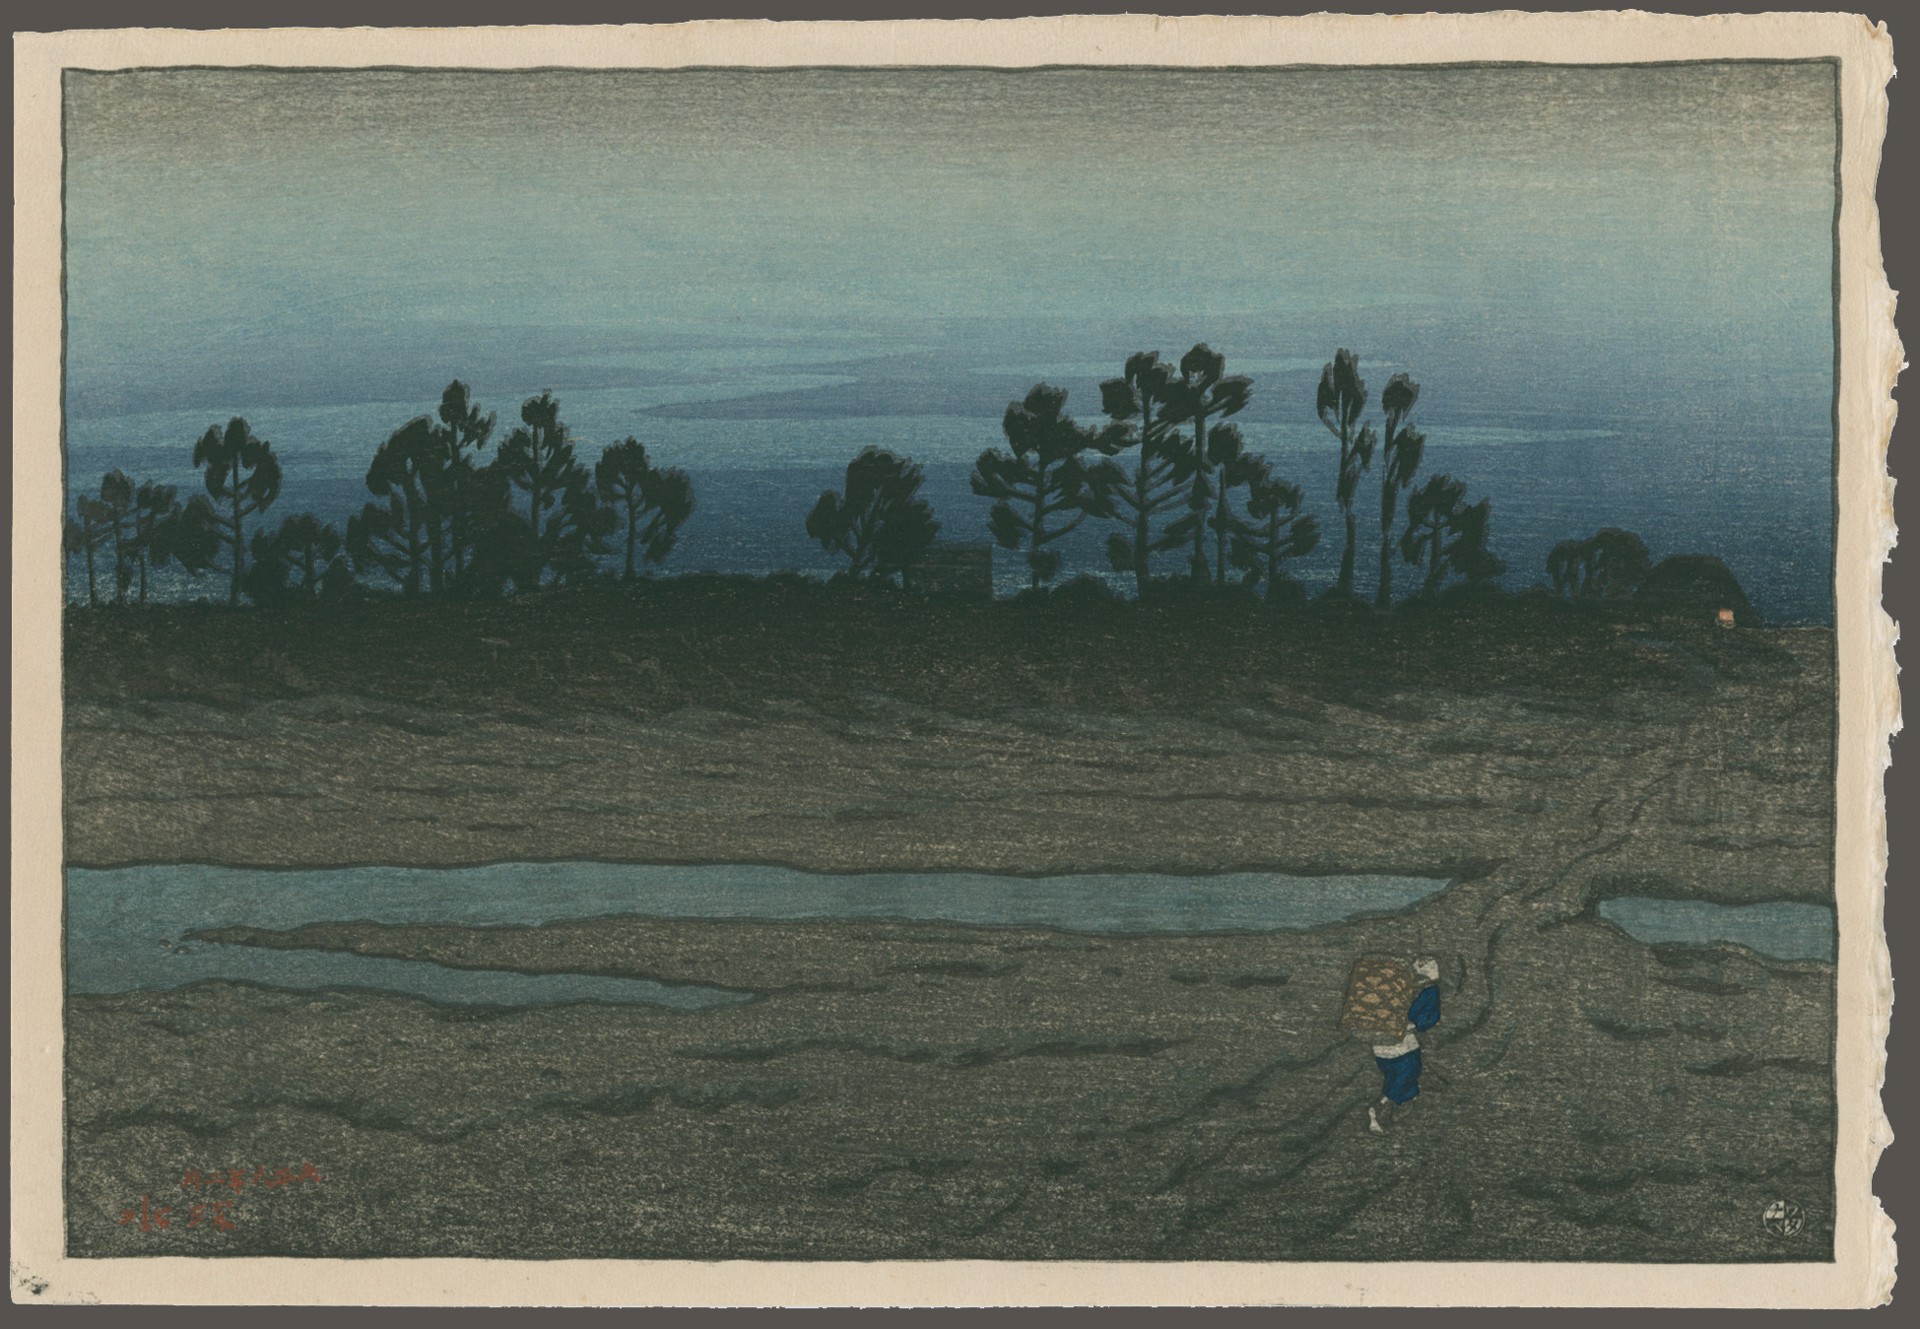 Evening View by the Tama River by Shinsui